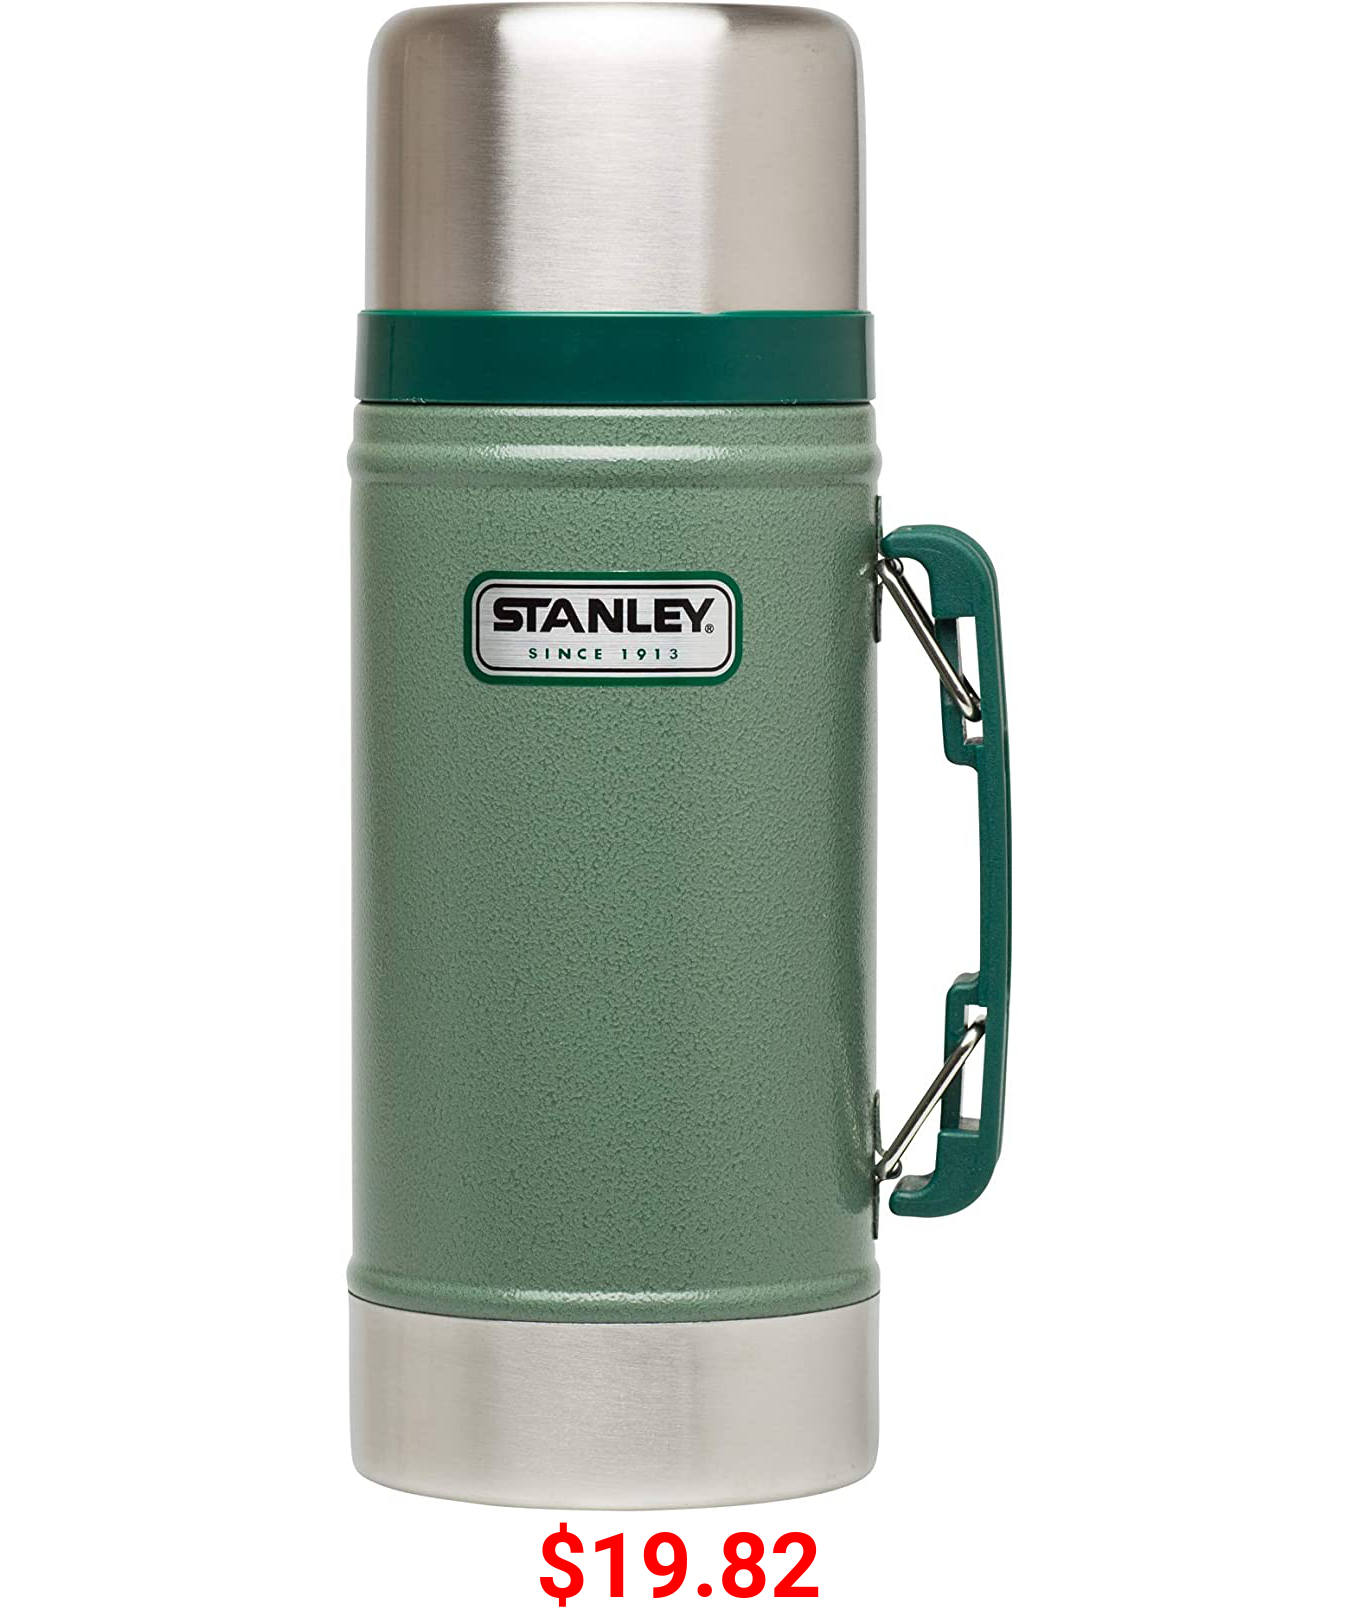 Stanley Classic Legendary Vacuum Insulated Food Jar 24oz – Stainless Steel, Naturally BPA-free Container – Keeps Food/Liquid Hot or Cold for 15 Hours – Leak Resistant, Easy Clean